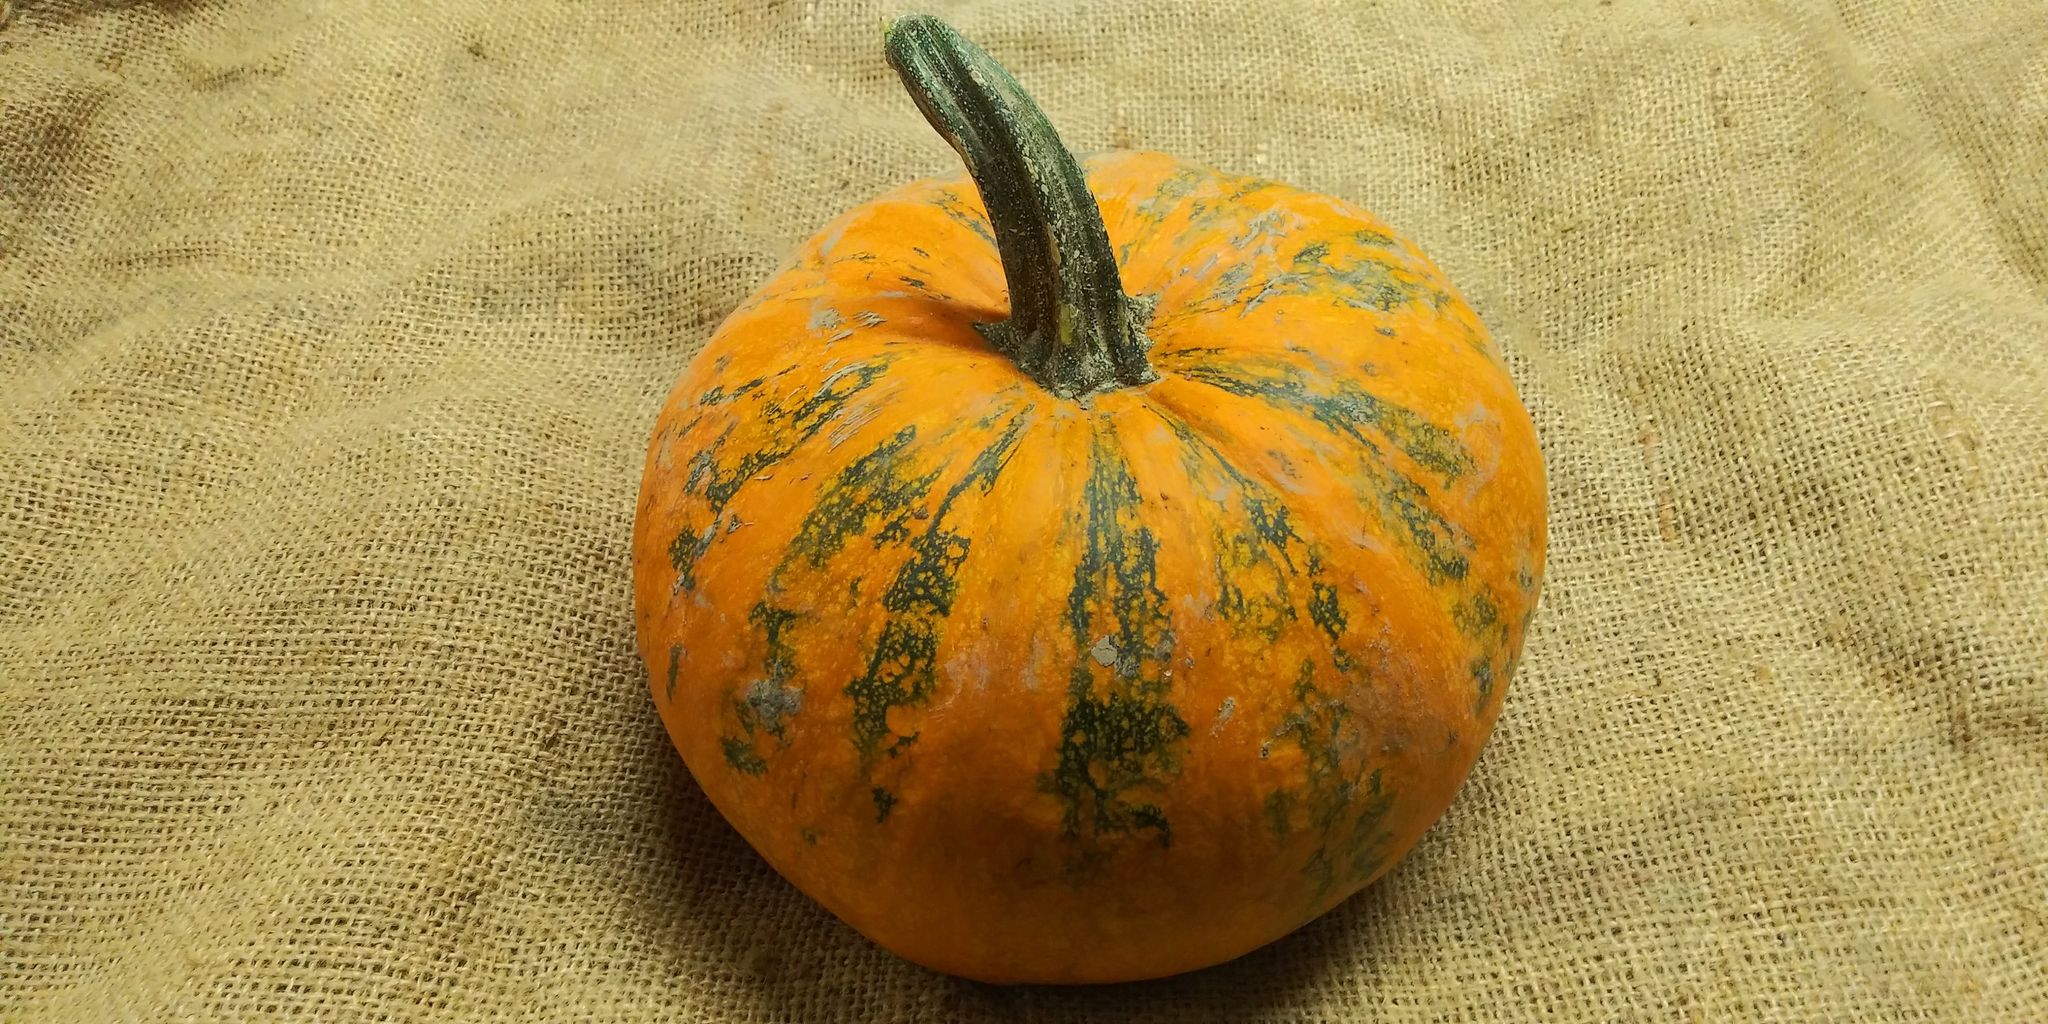 Emerald Naked Seeded' Pumpkin – Experimental Farm Network Seed Store